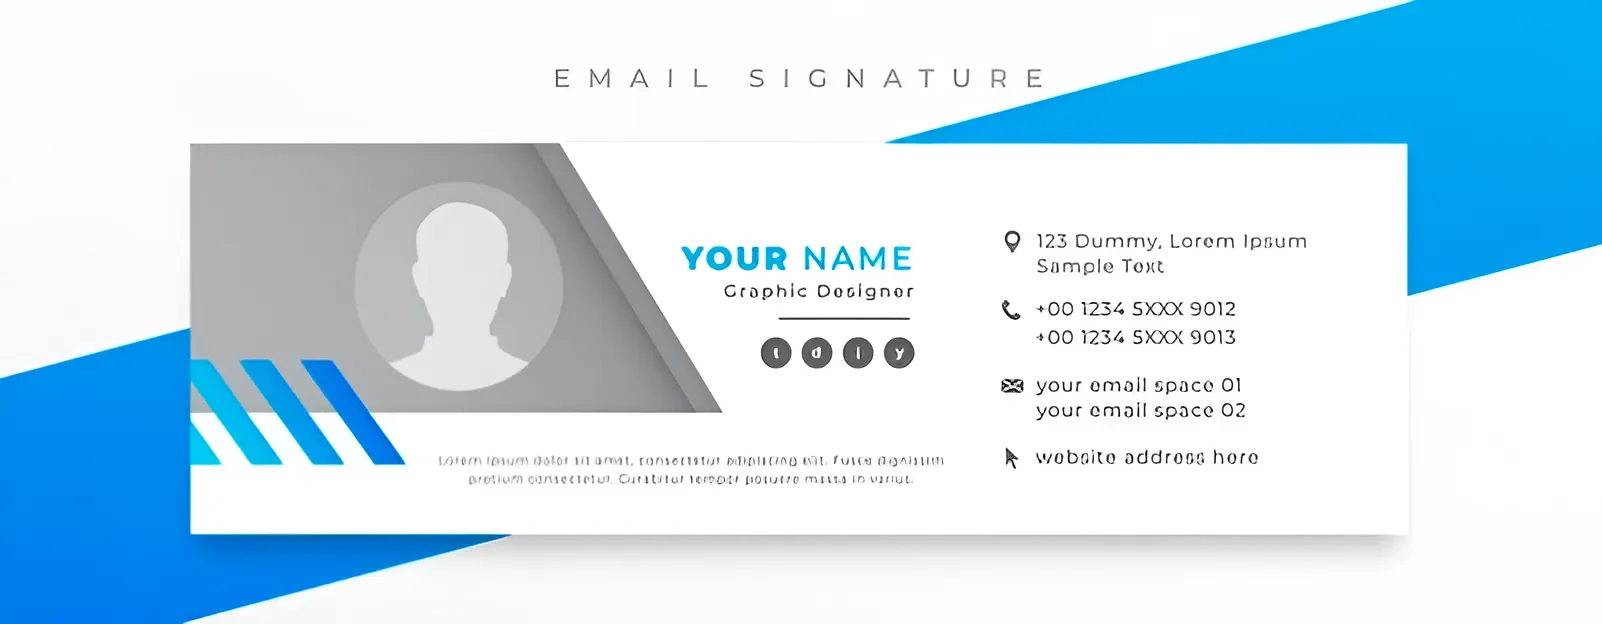 Digital Business Cards | Email Signatures